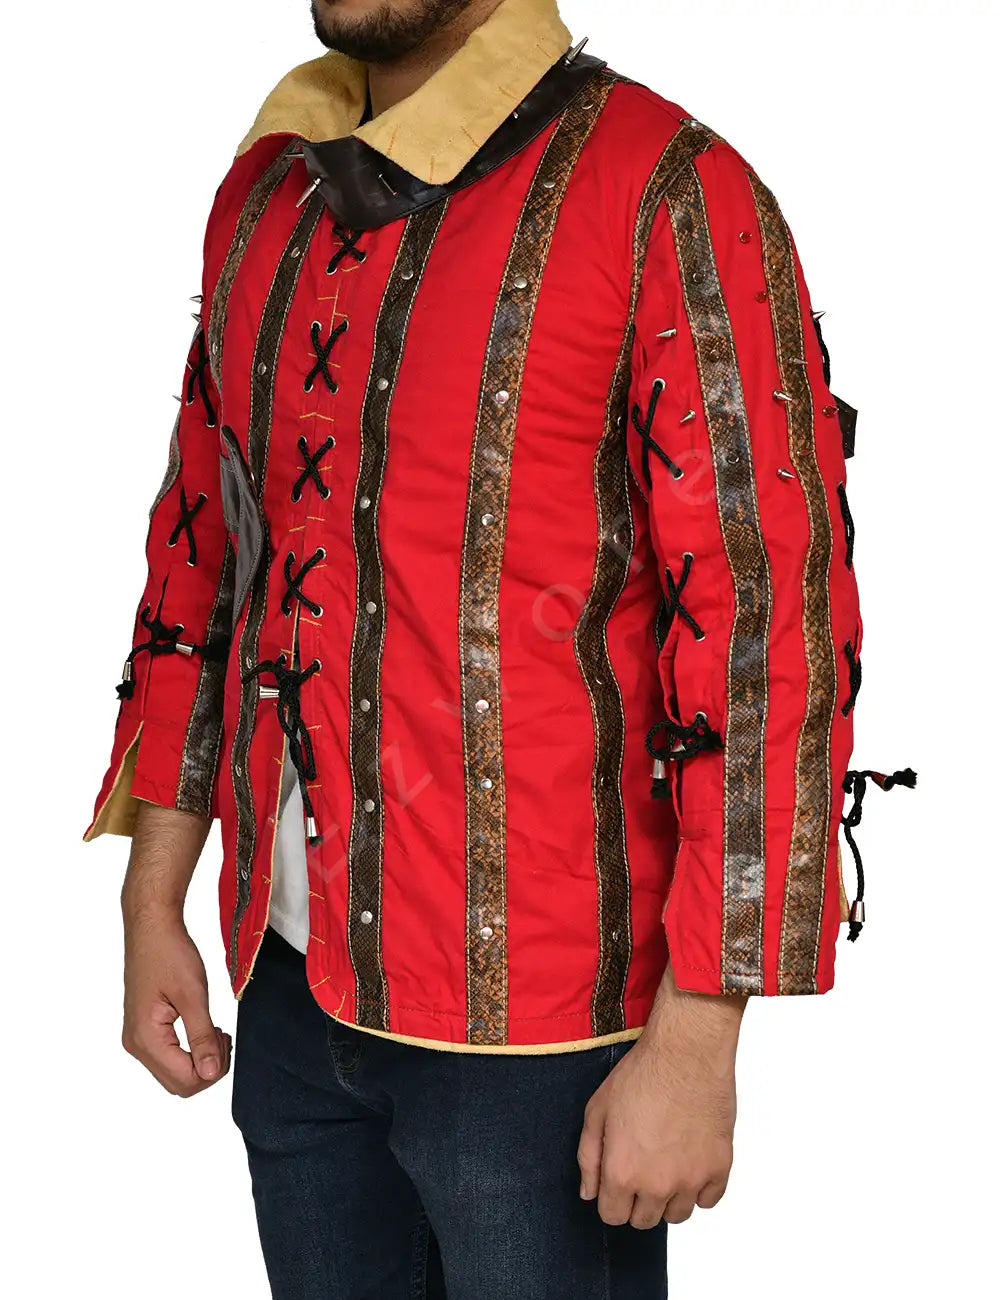 Double Armor Red Jacket